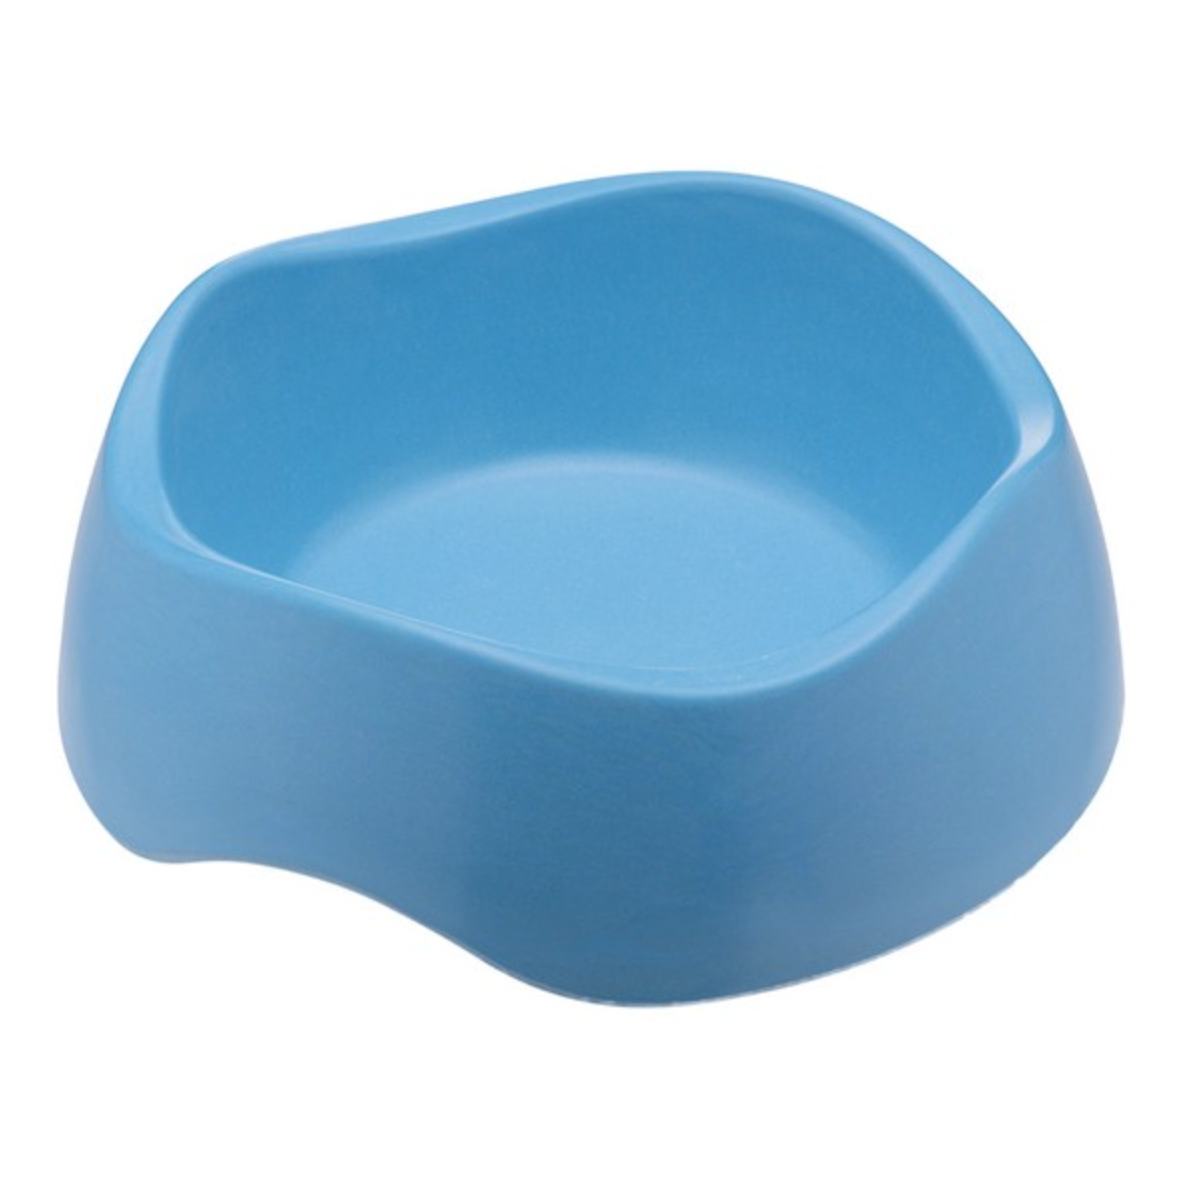 Beco Food and Water Bowl (Blue)